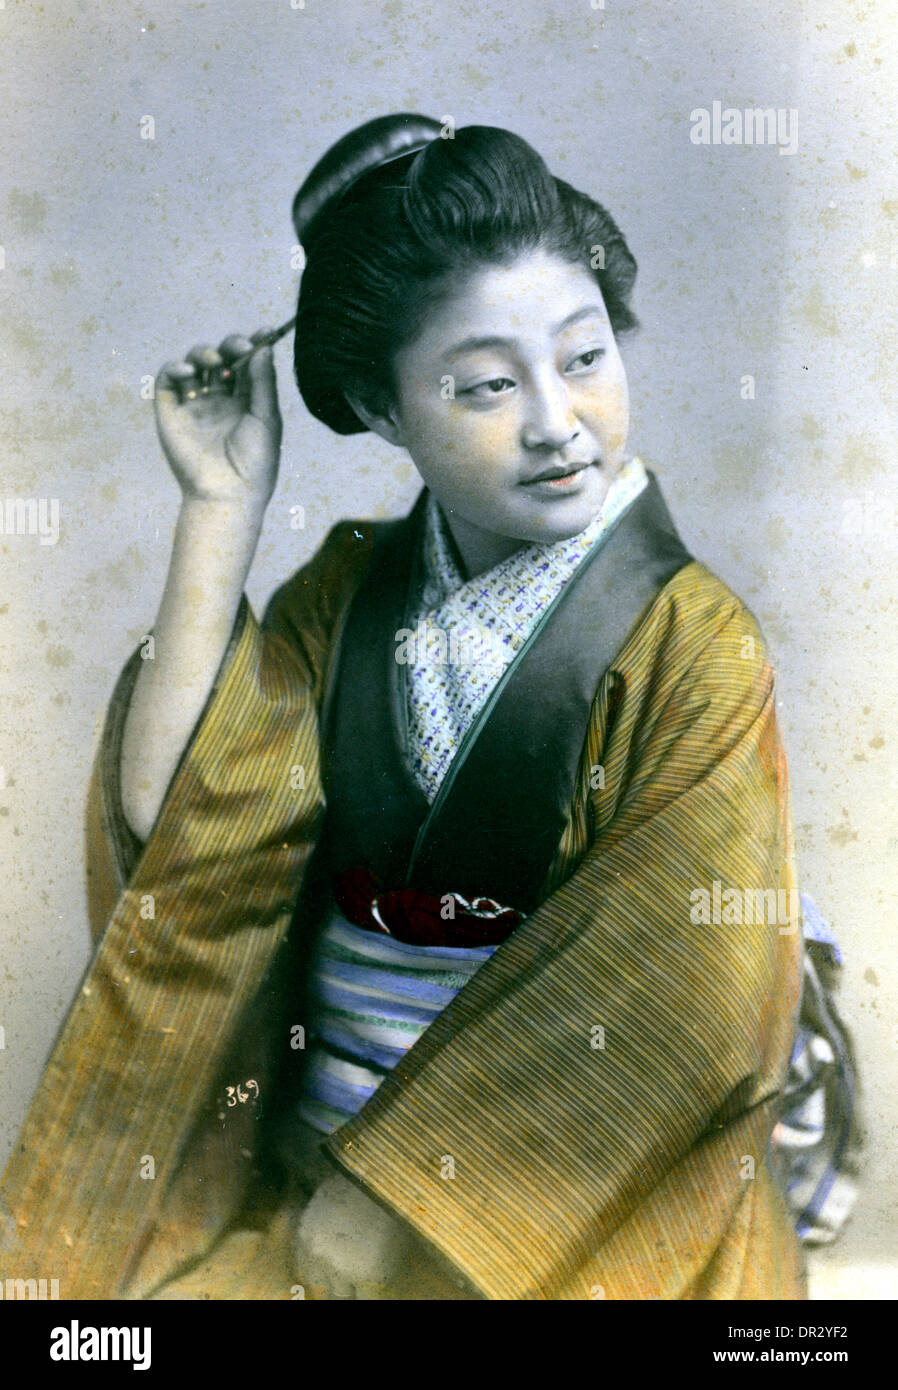 Japanese woman with hairpin Stock Photo